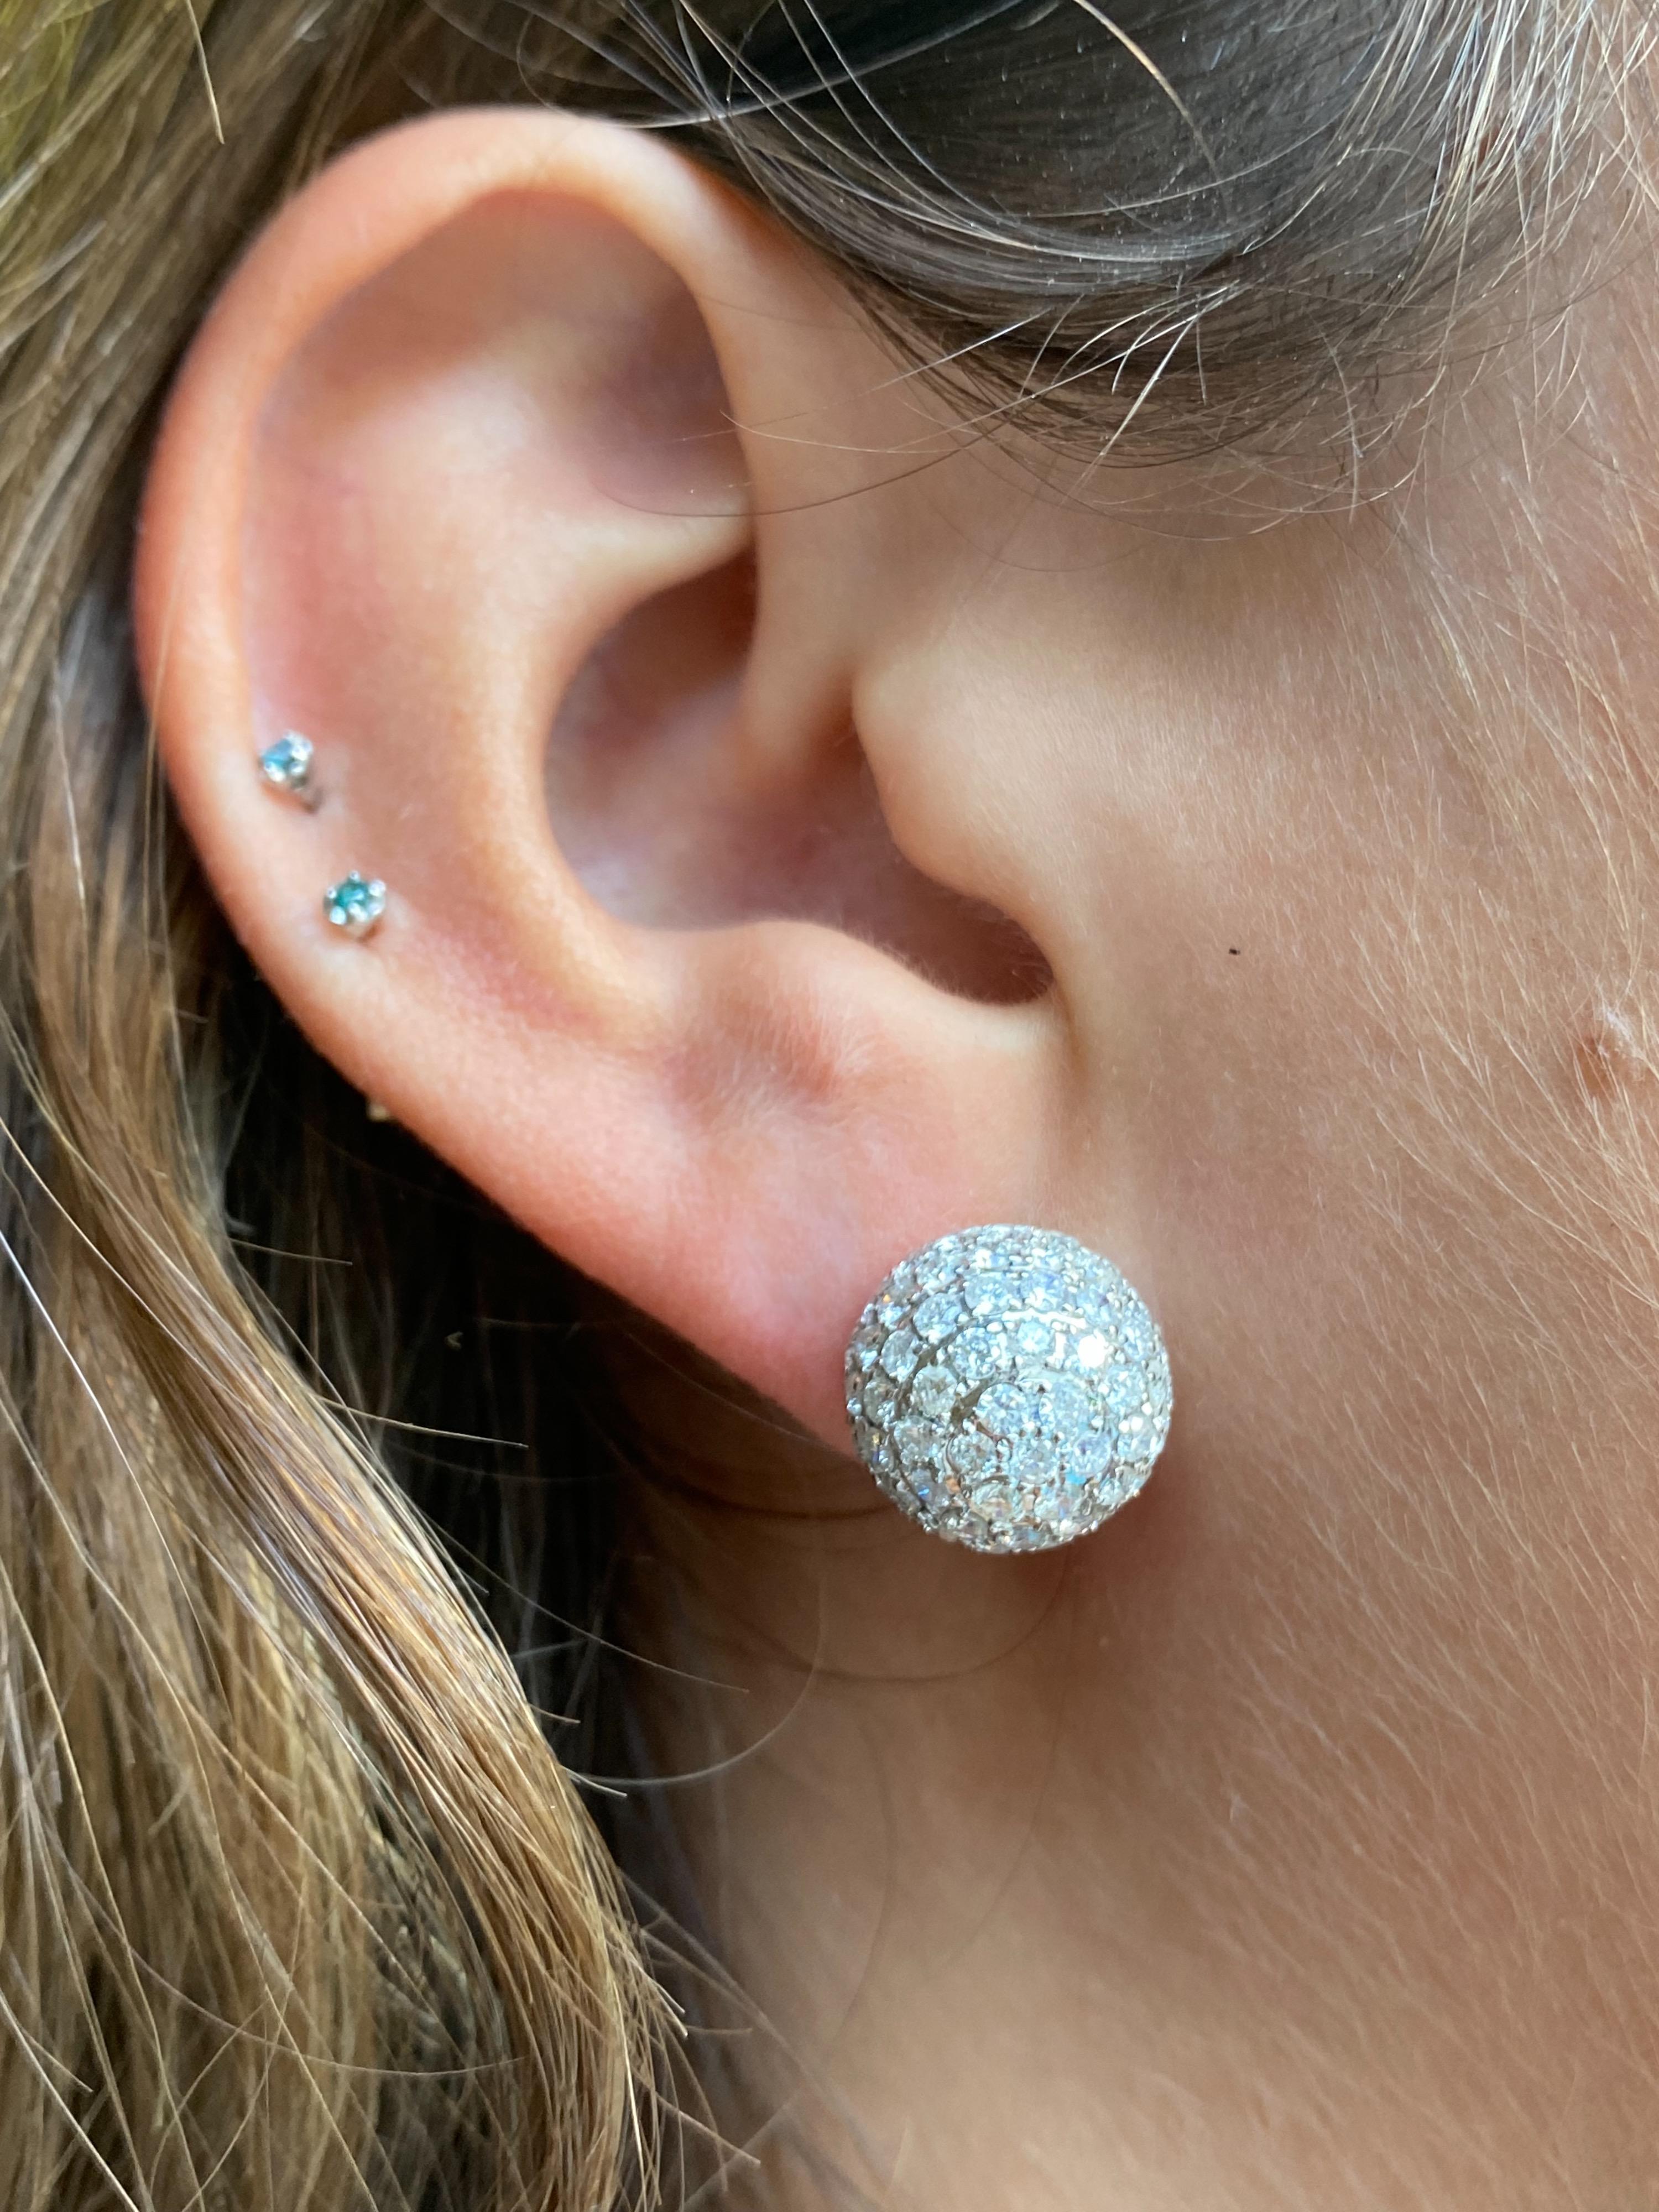 Natural diamond cluster stud earrings set in 14k white gold. Over 4 carats in vibrant natural diamonds and set in a tight and sturdy 14k solid gold push-back closure with 2 tightness levels for additional versatility and sturdiness. 

✔ Gold Karat: